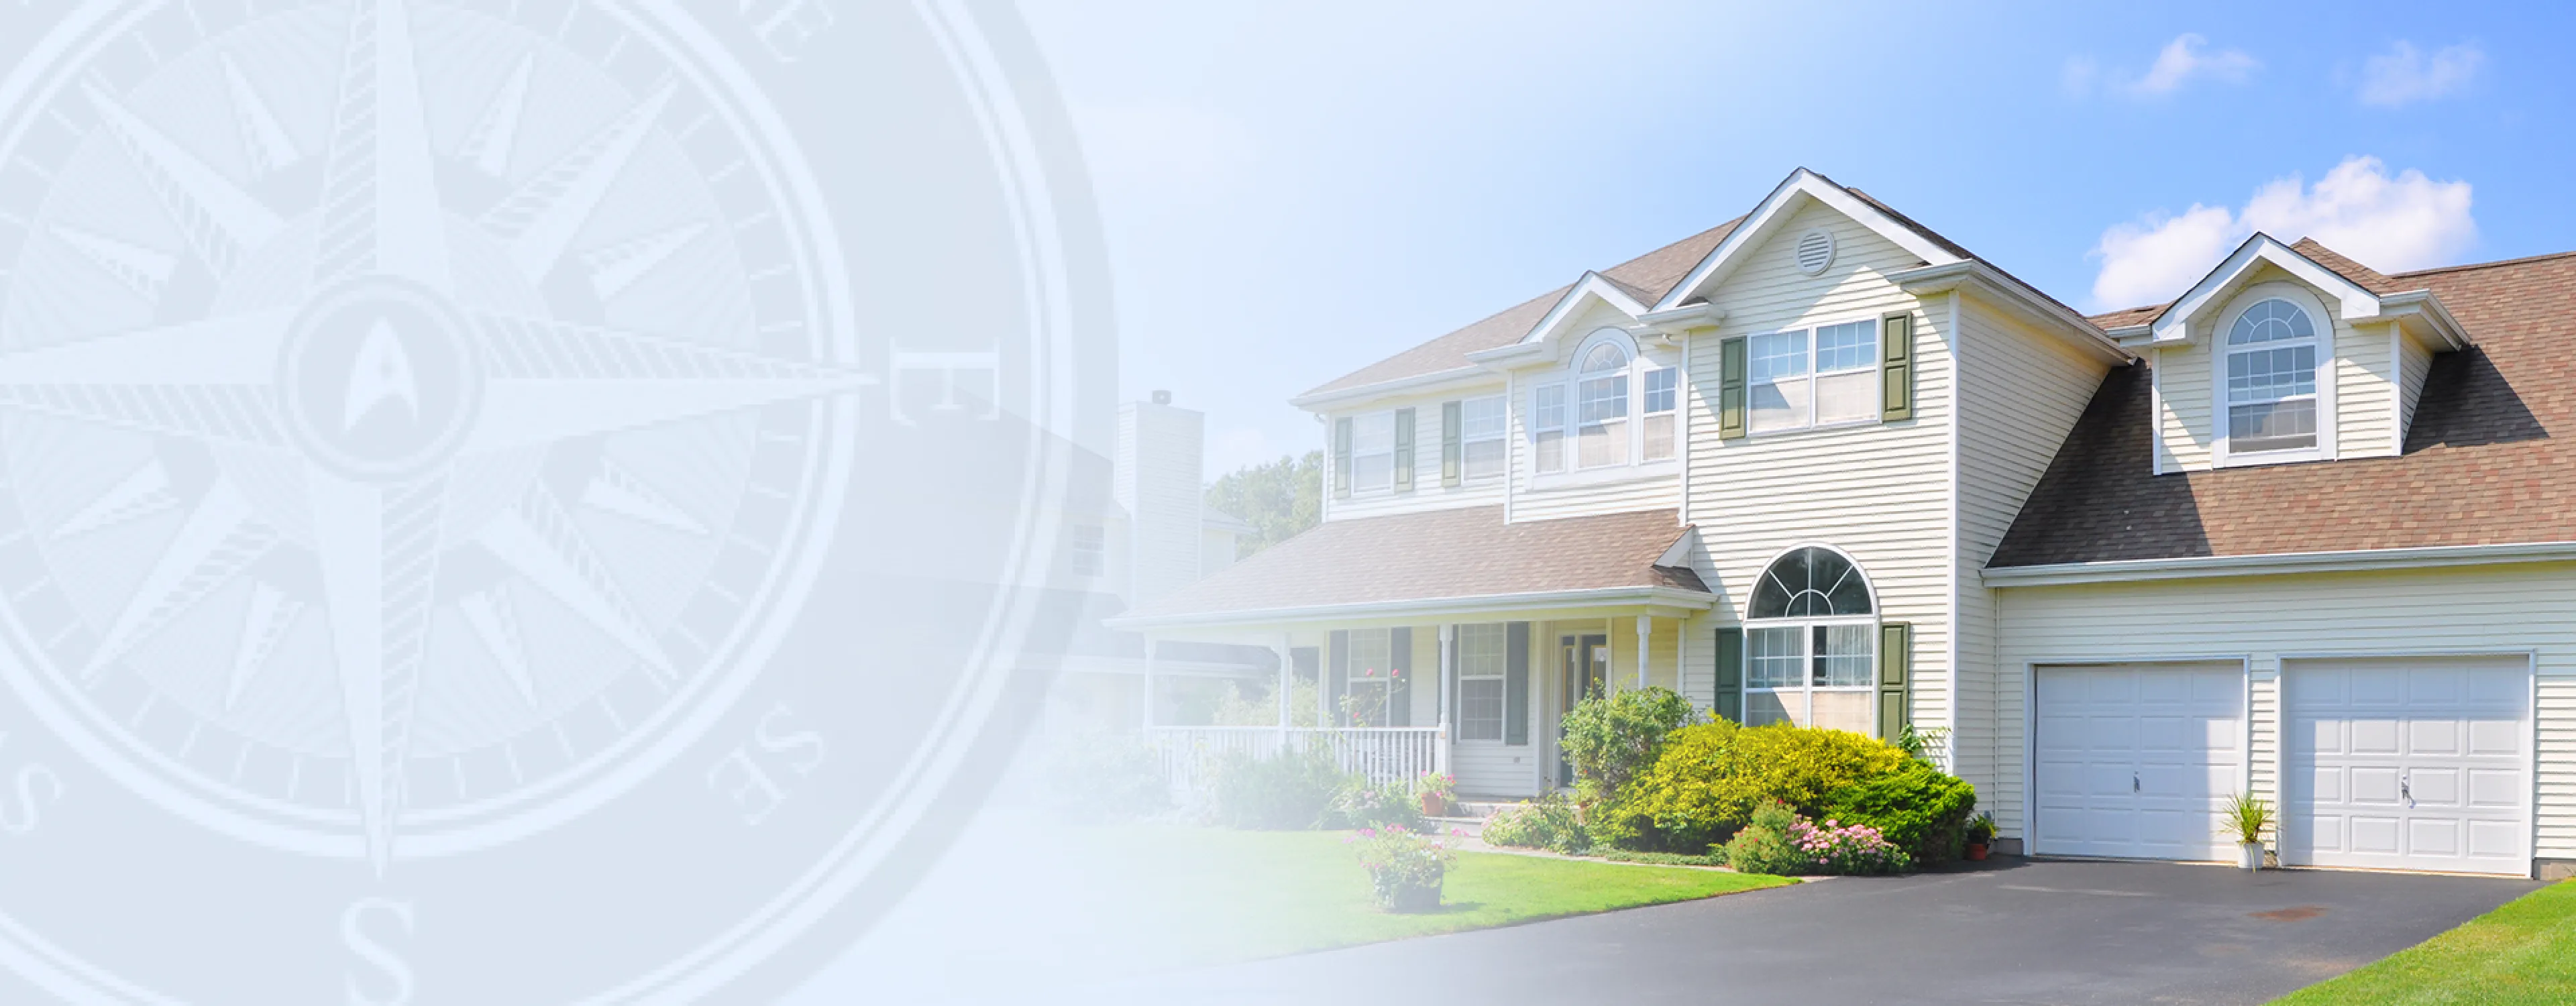 Expert Home Inspections Services in Cranbrook, British Columbia for complete assurance